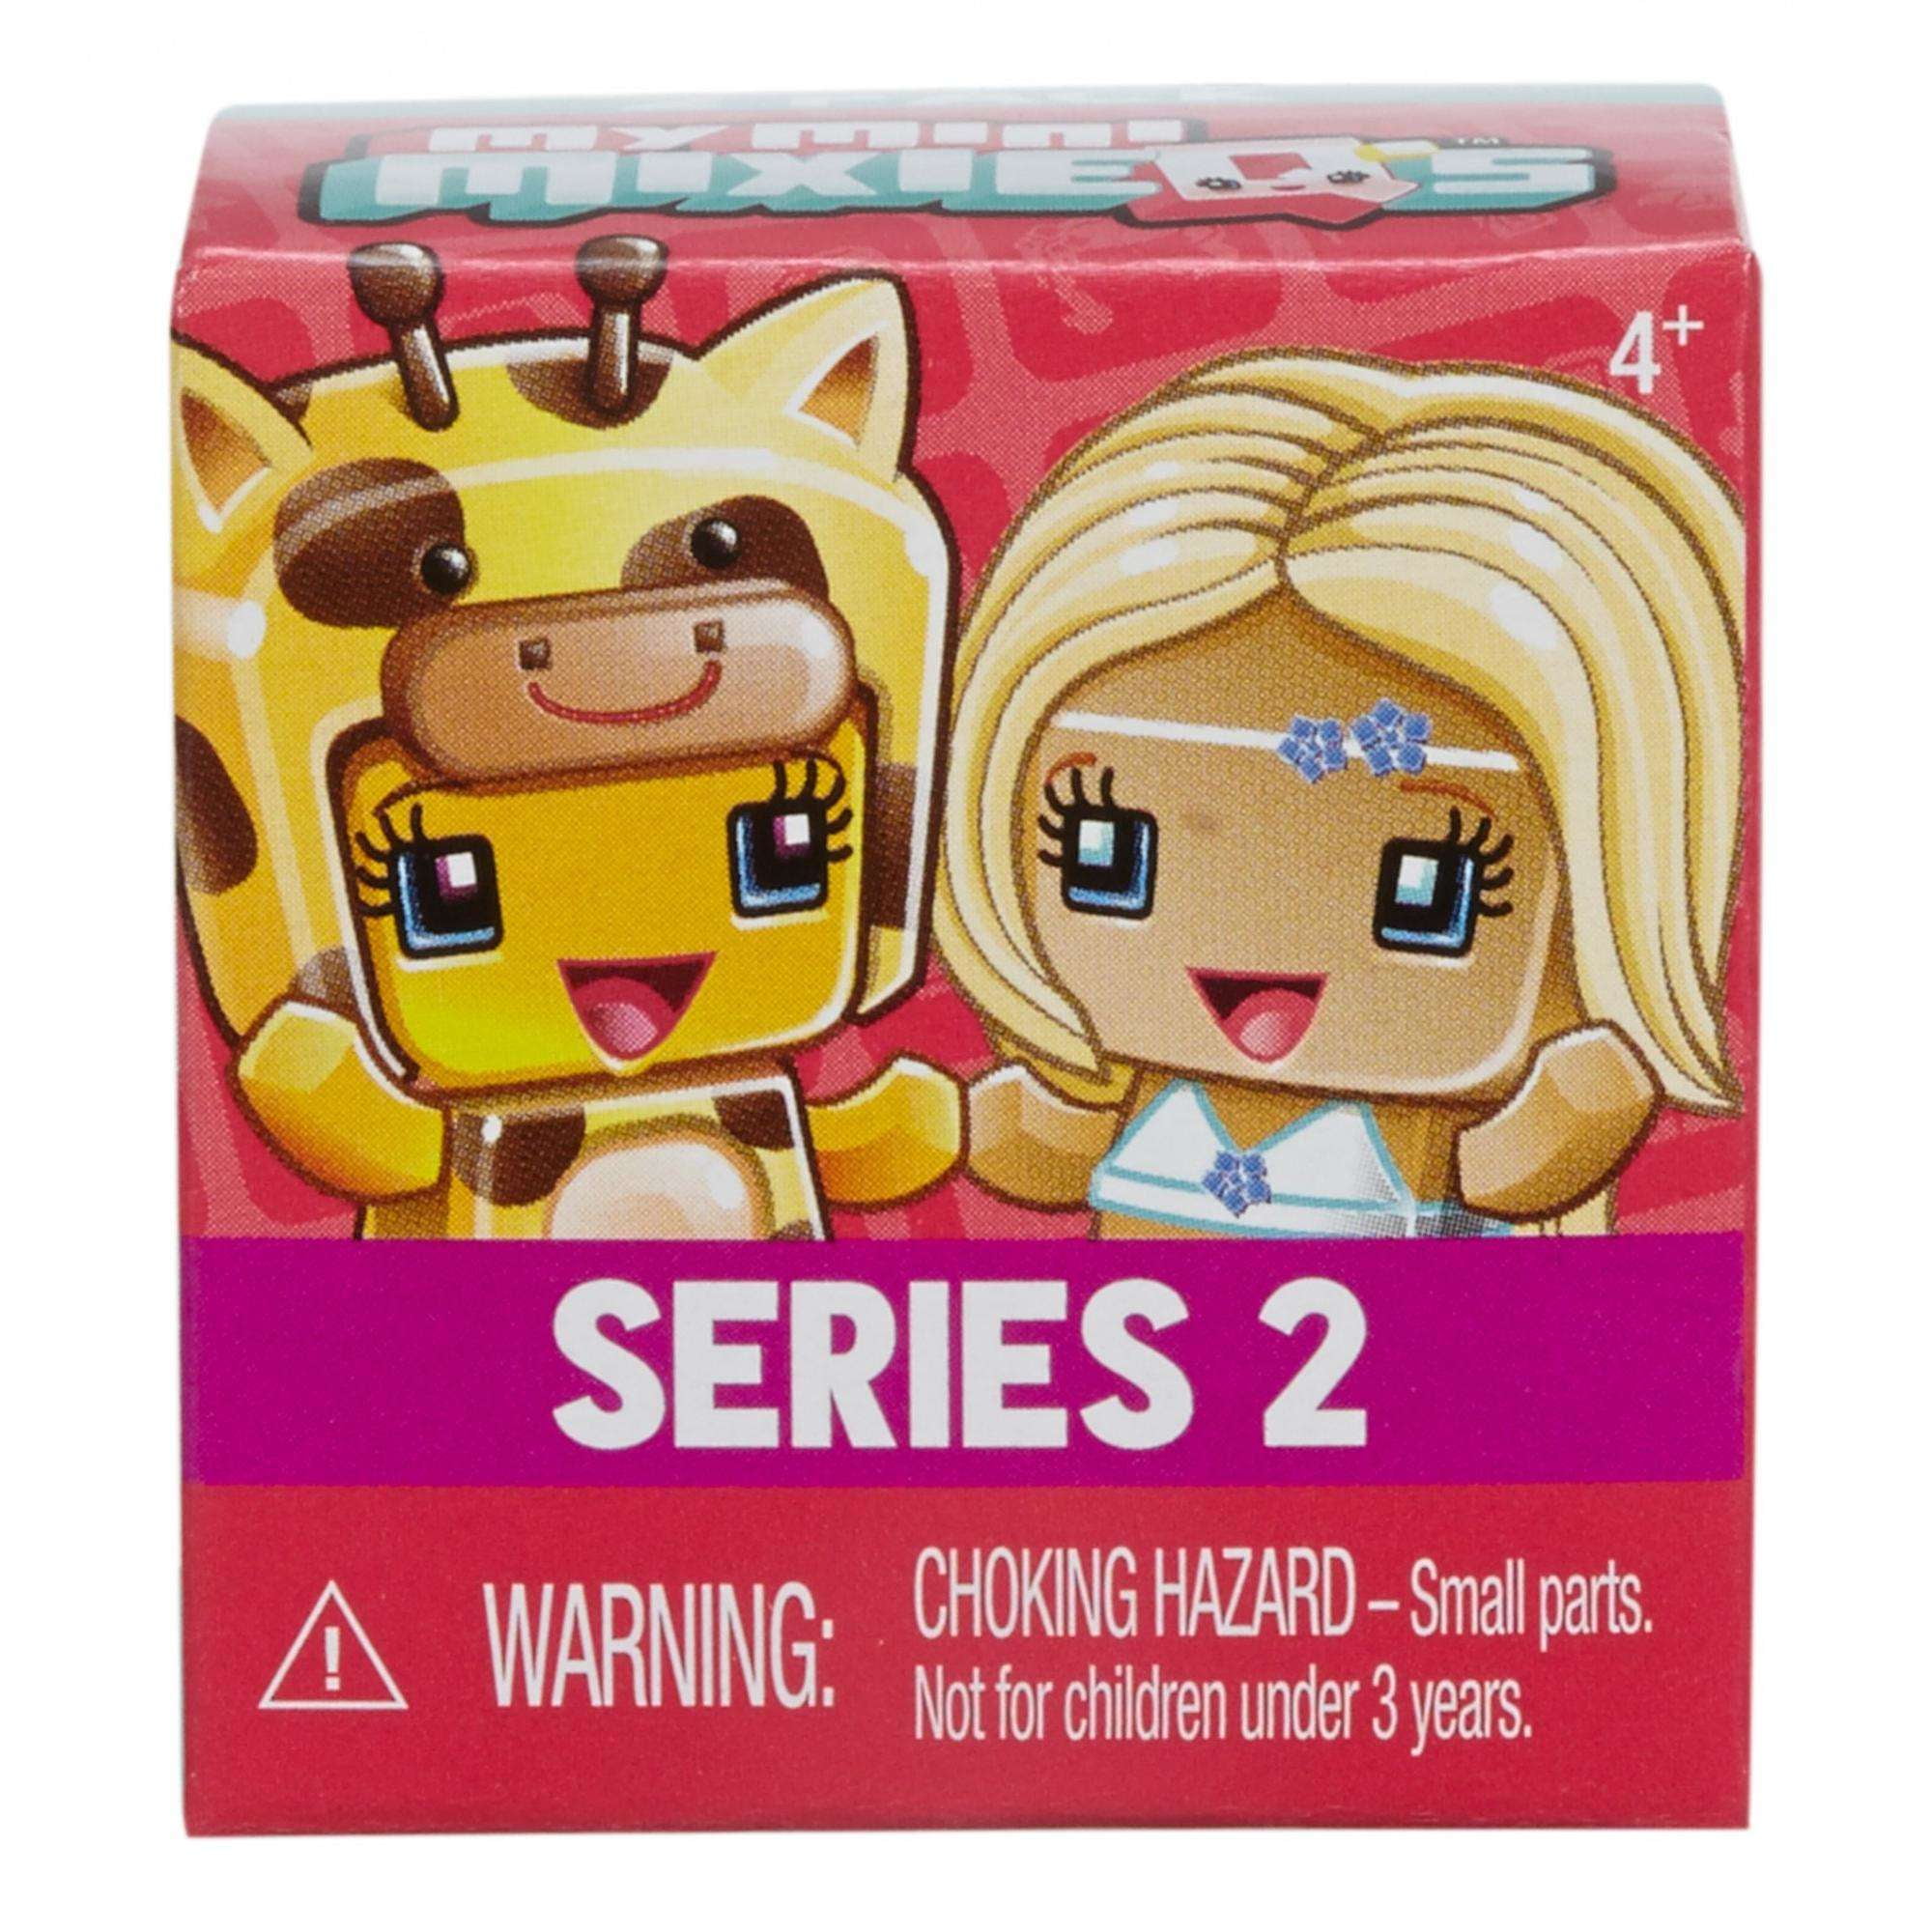 NEW Case Of 36 Pack MY MINI MIXIE Q'S MIXIEQ Toy New Blind Box SERIES 2